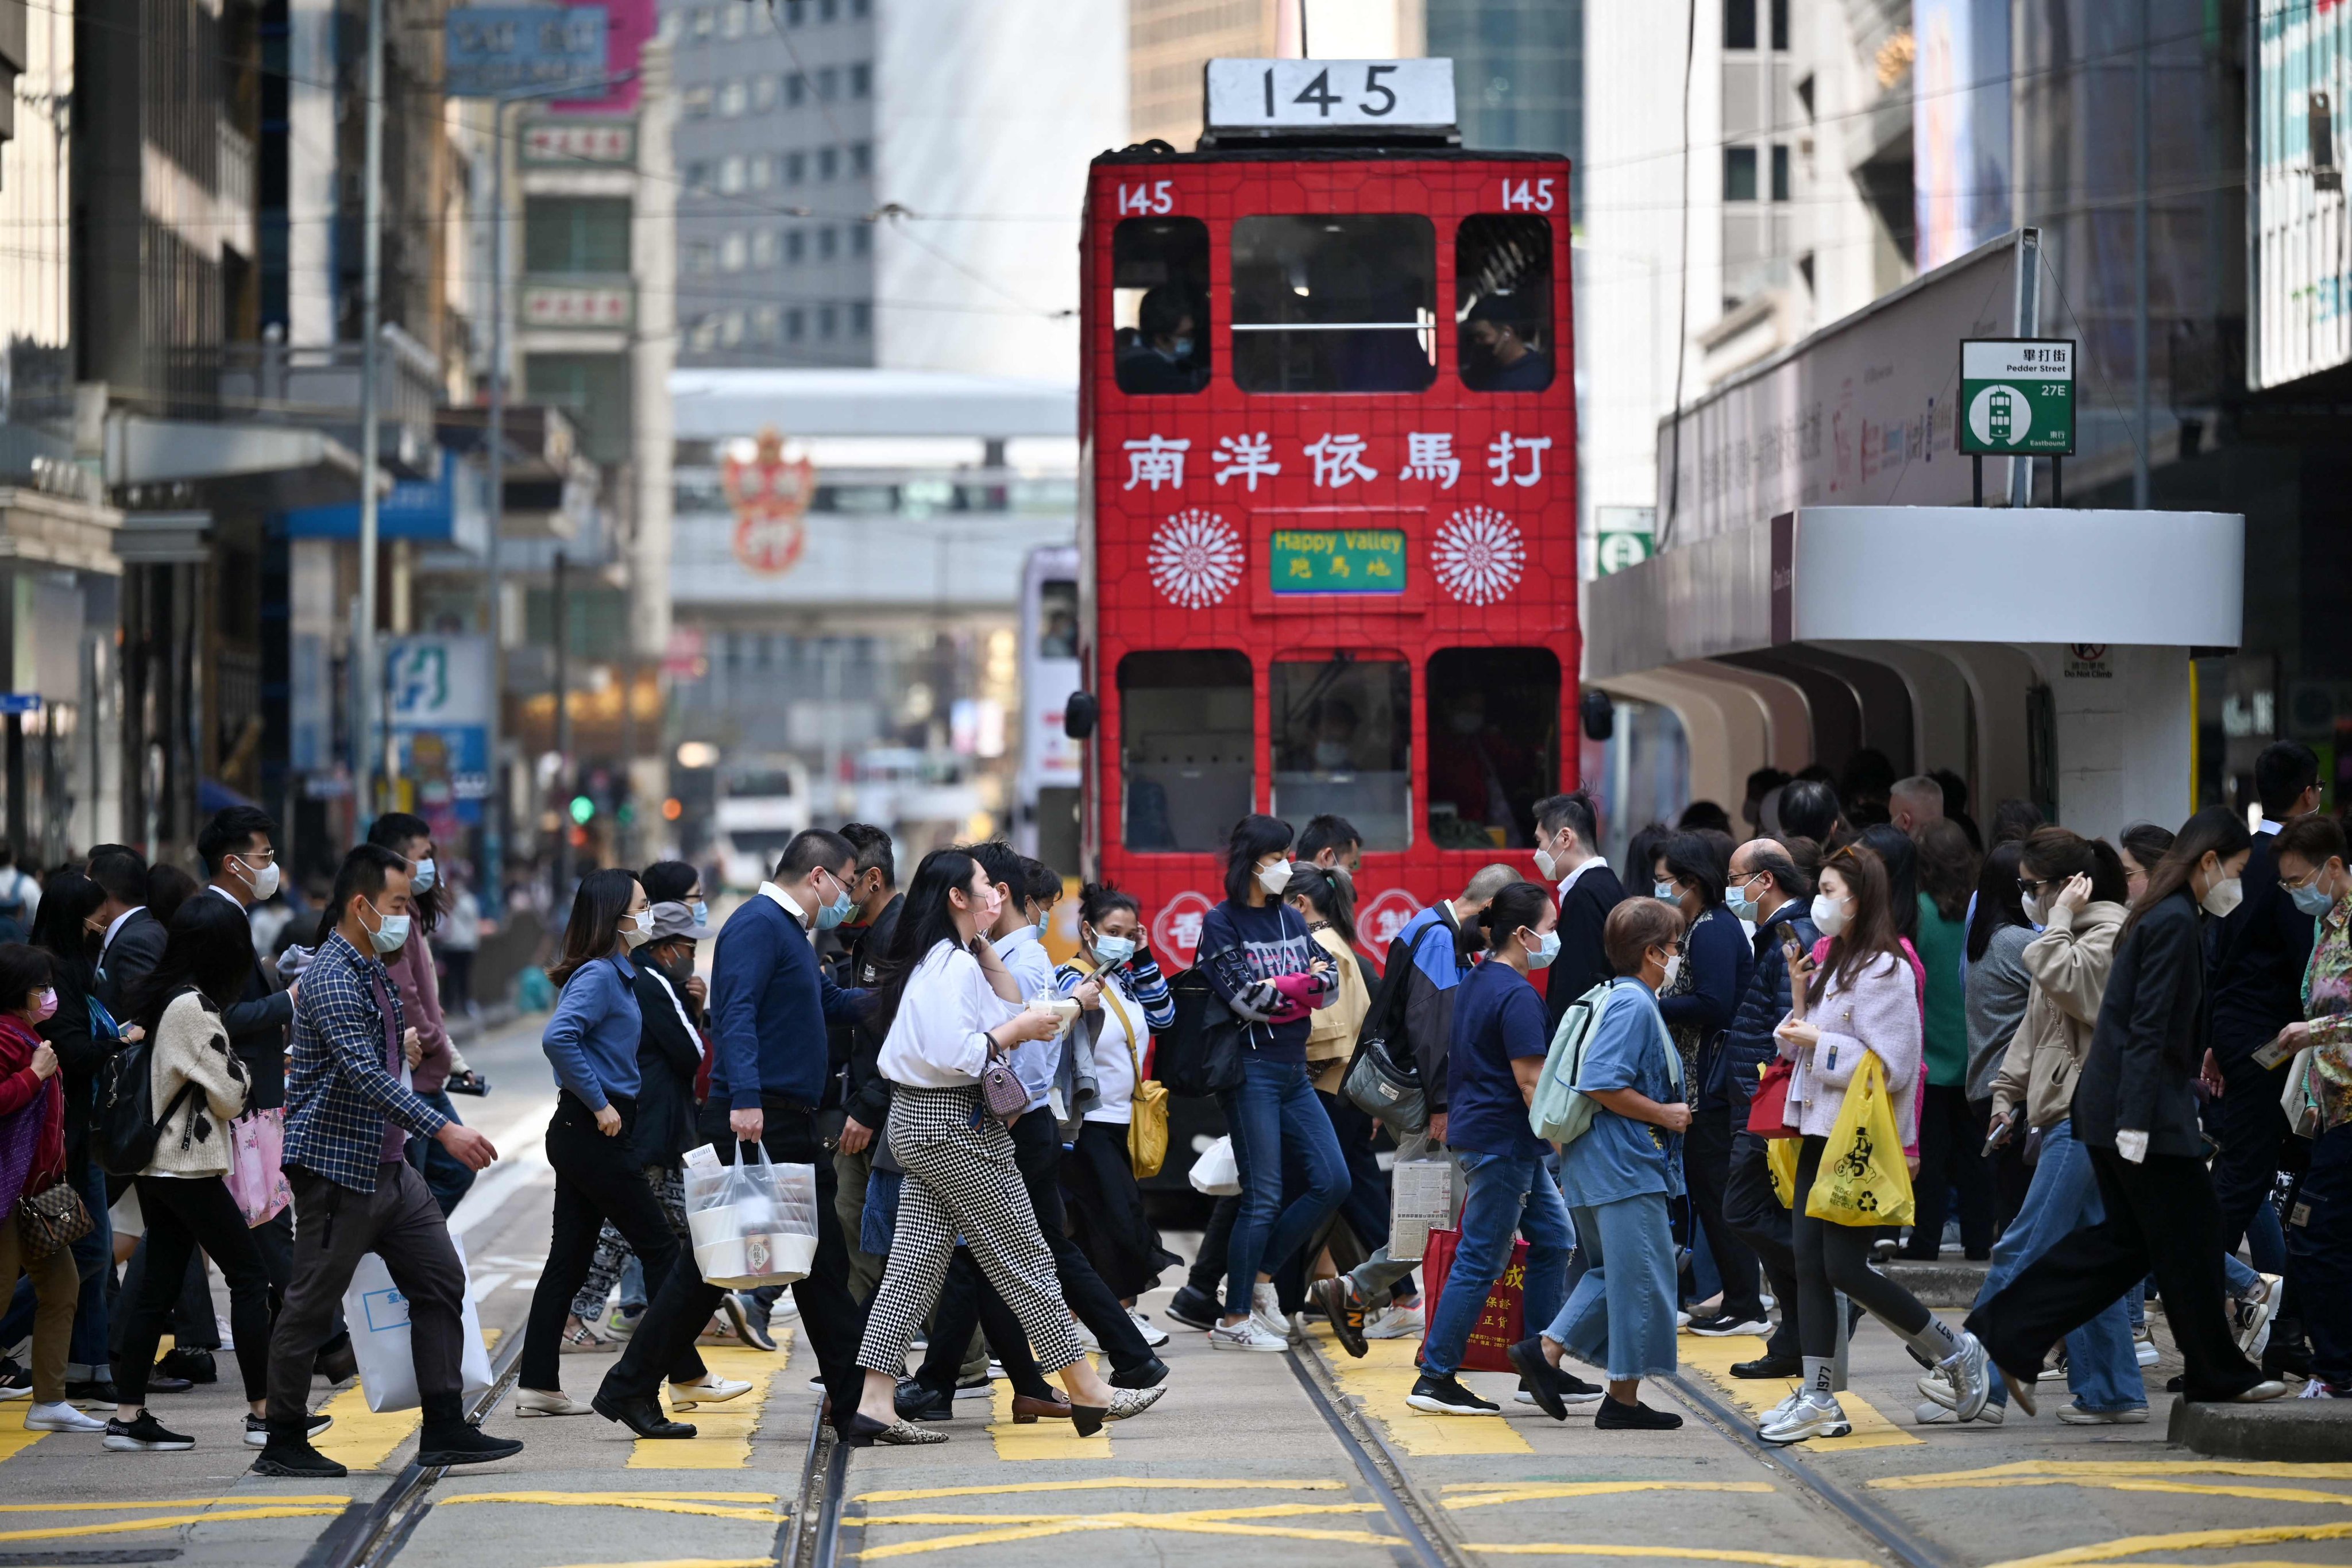 For people coming to work in Hong Kong, knowing Mandarin will be an advantage, recruiters say. Photo: AFP